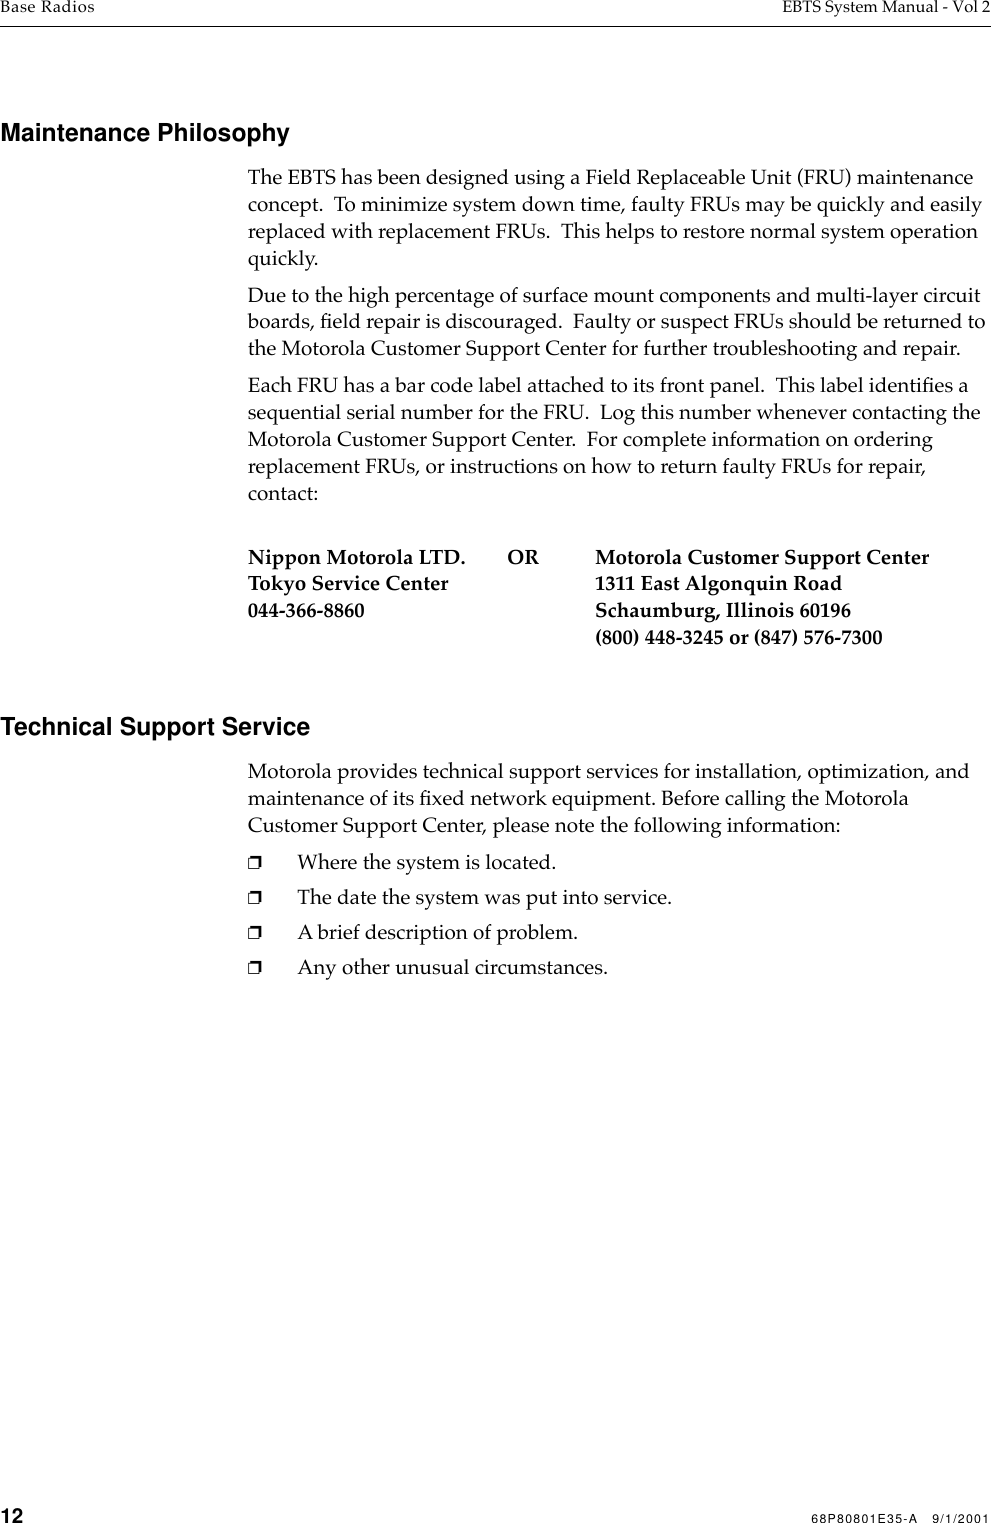 12 68P80801E35-A   9/1/2001Base Radios EBTS System Manual - Vol 2 Maintenance PhilosophyThe EBTS has been designed using a Field Replaceable Unit (FRU) maintenance concept.  To minimize system down time, faulty FRUs may be quickly and easily replaced with replacement FRUs.  This helps to restore normal system operation quickly.Due to the high percentage of surface mount components and multi-layer circuit boards, ﬁeld repair is discouraged.  Faulty or suspect FRUs should be returned to the Motorola Customer Support Center for further troubleshooting and repair.Each FRU has a bar code label attached to its front panel.  This label identiﬁes a sequential serial number for the FRU.  Log this number whenever contacting the Motorola Customer Support Center.  For complete information on ordering replacement FRUs, or instructions on how to return faulty FRUs for repair, contact:Nippon Motorola LTD.        OR Motorola Customer Support CenterTokyo Service Center 1311 East Algonquin Road044-366-8860 Schaumburg, Illinois 60196(800) 448-3245 or (847) 576-7300Technical Support ServiceMotorola provides technical support services for installation, optimization, and maintenance of its ﬁxed network equipment. Before calling the Motorola Customer Support Center, please note the following information:❐Where the system is located.❐The date the system was put into service.❐A brief description of problem. ❐Any other unusual circumstances.